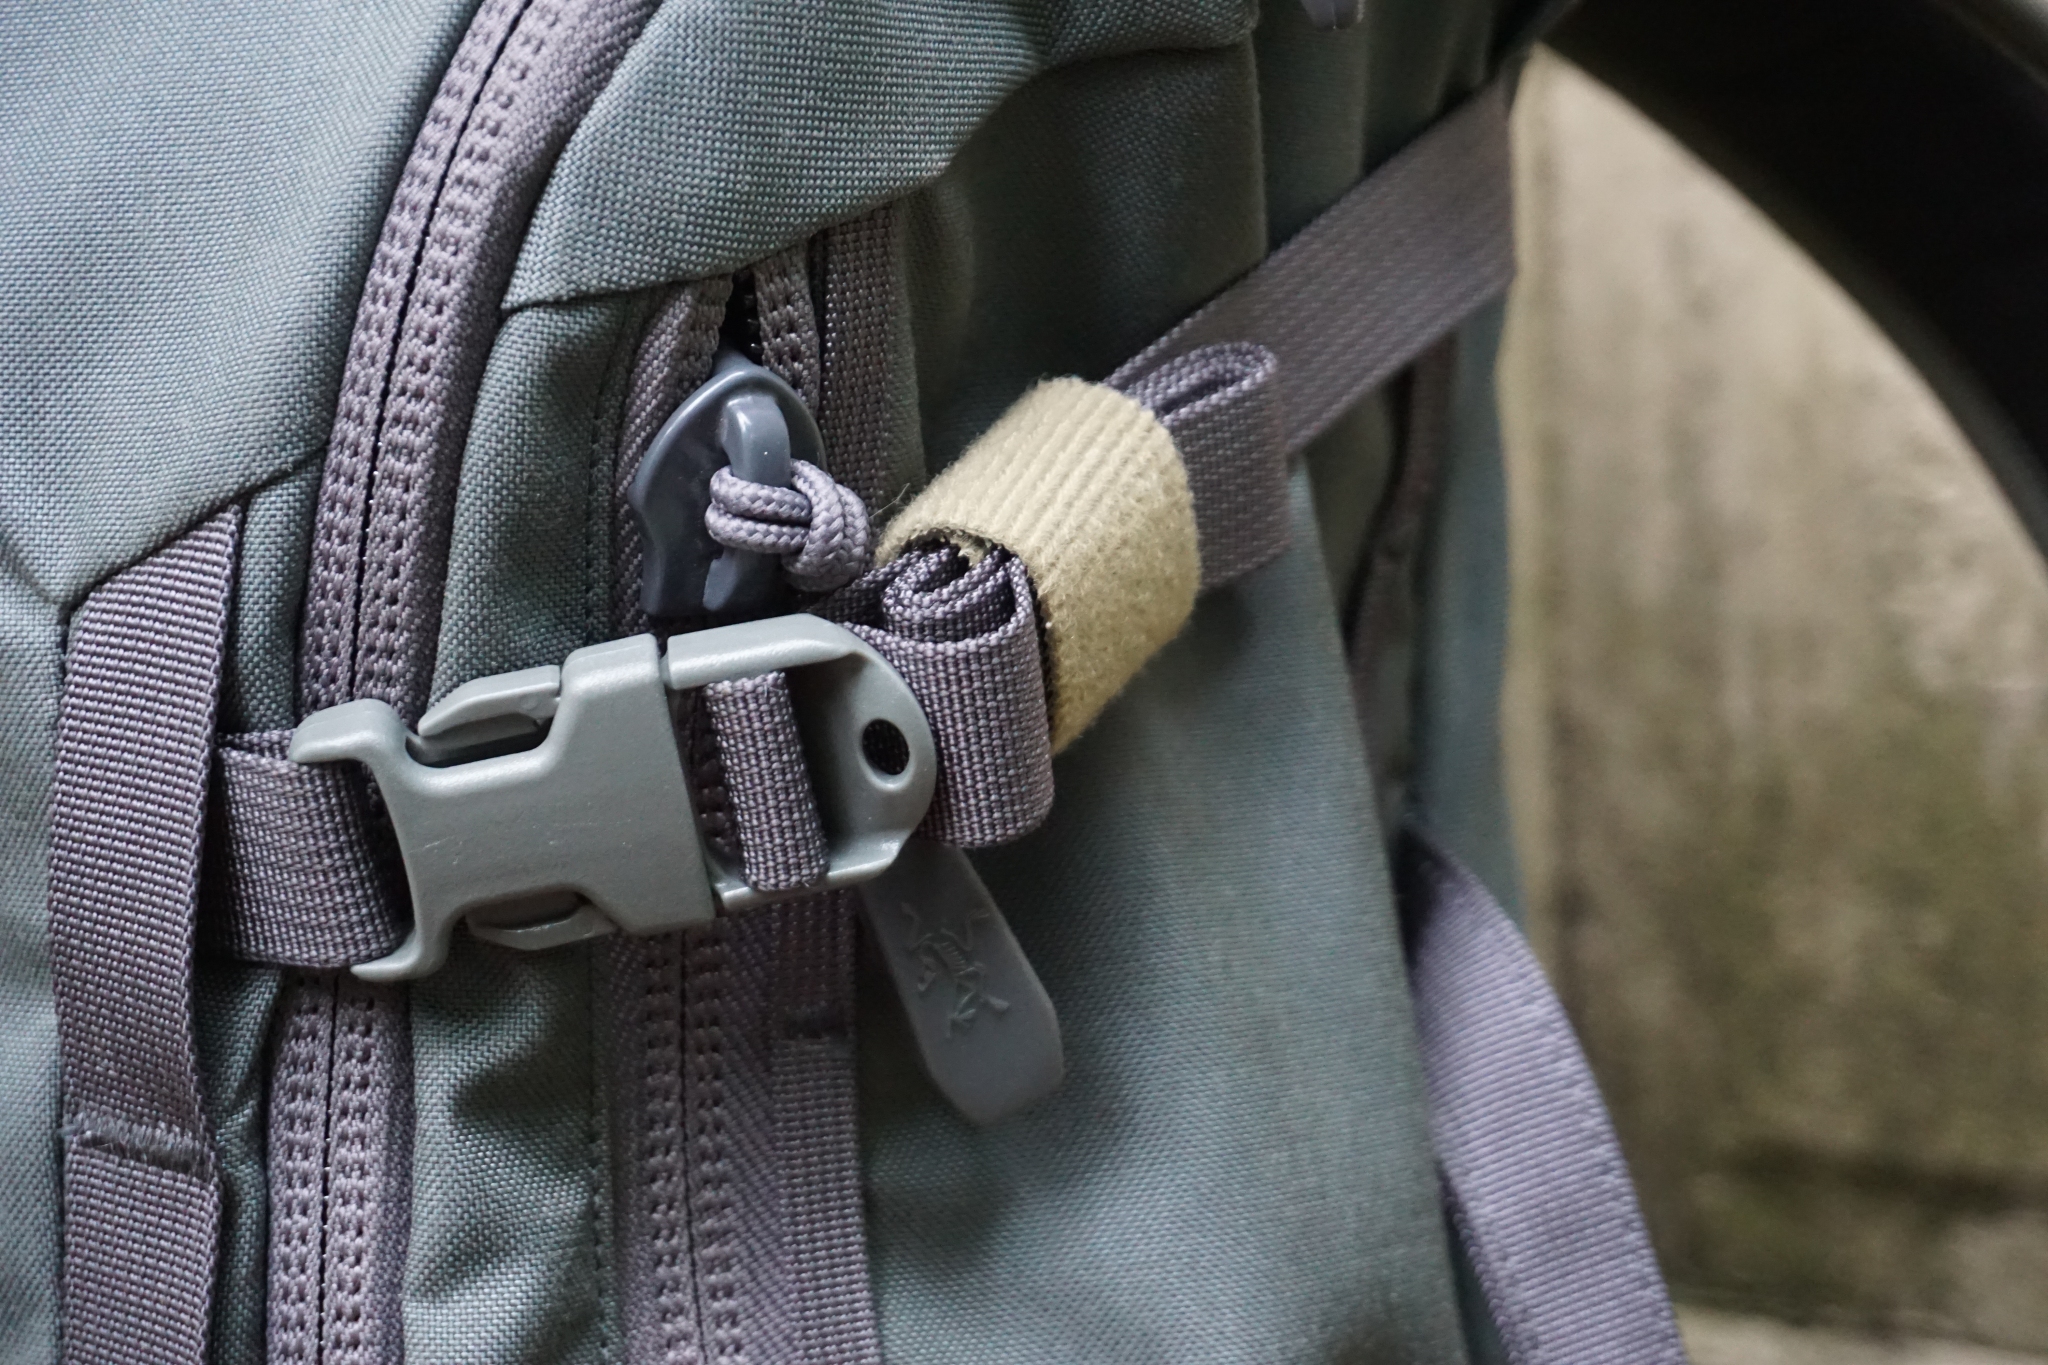 Arc’teryx LEAF Assault Pack 30 / Khard 30: Review - The Perfect Pack